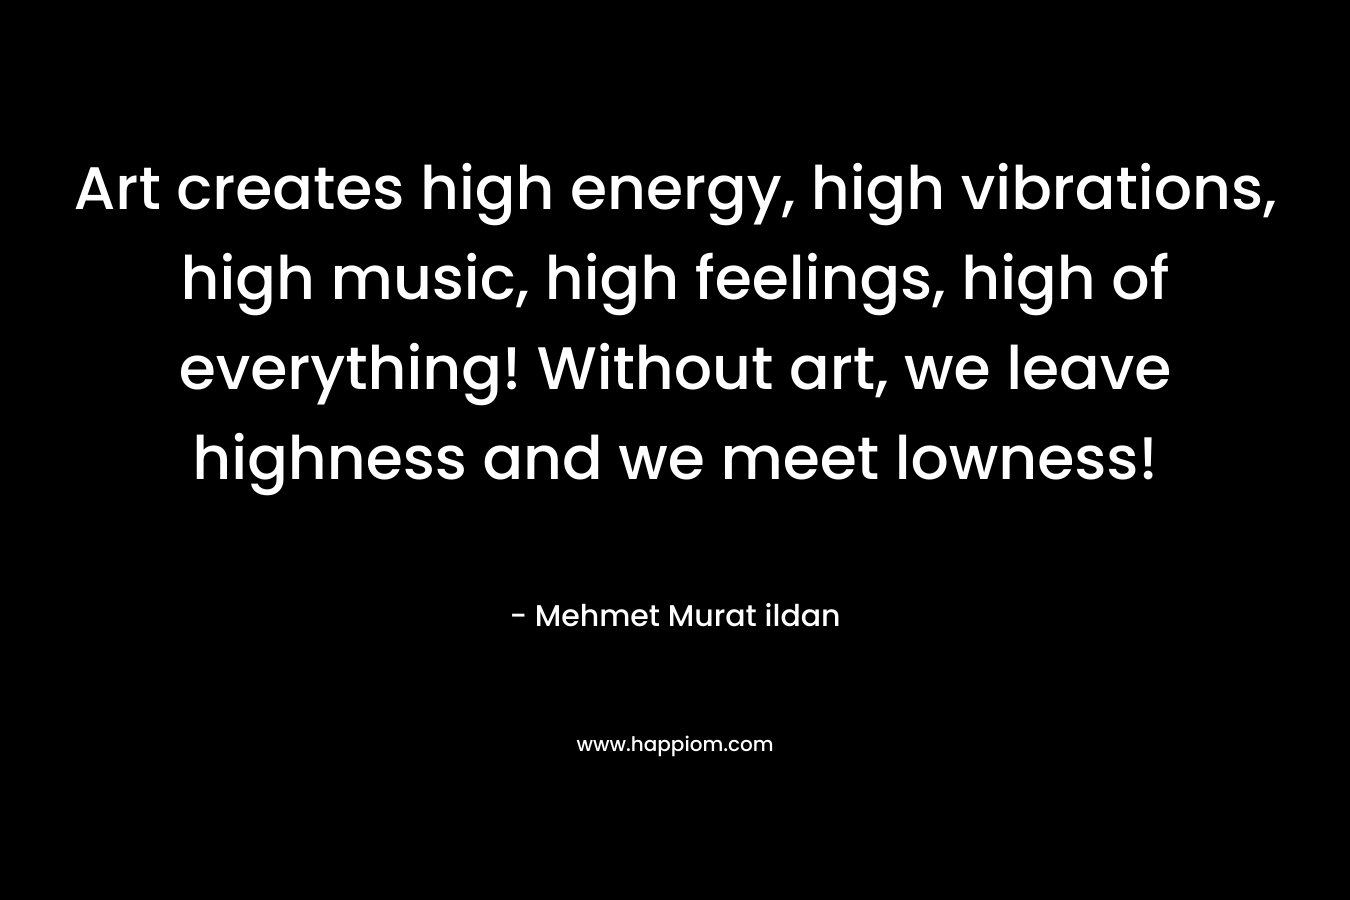 Art creates high energy, high vibrations, high music, high feelings, high of everything! Without art, we leave highness and we meet lowness!